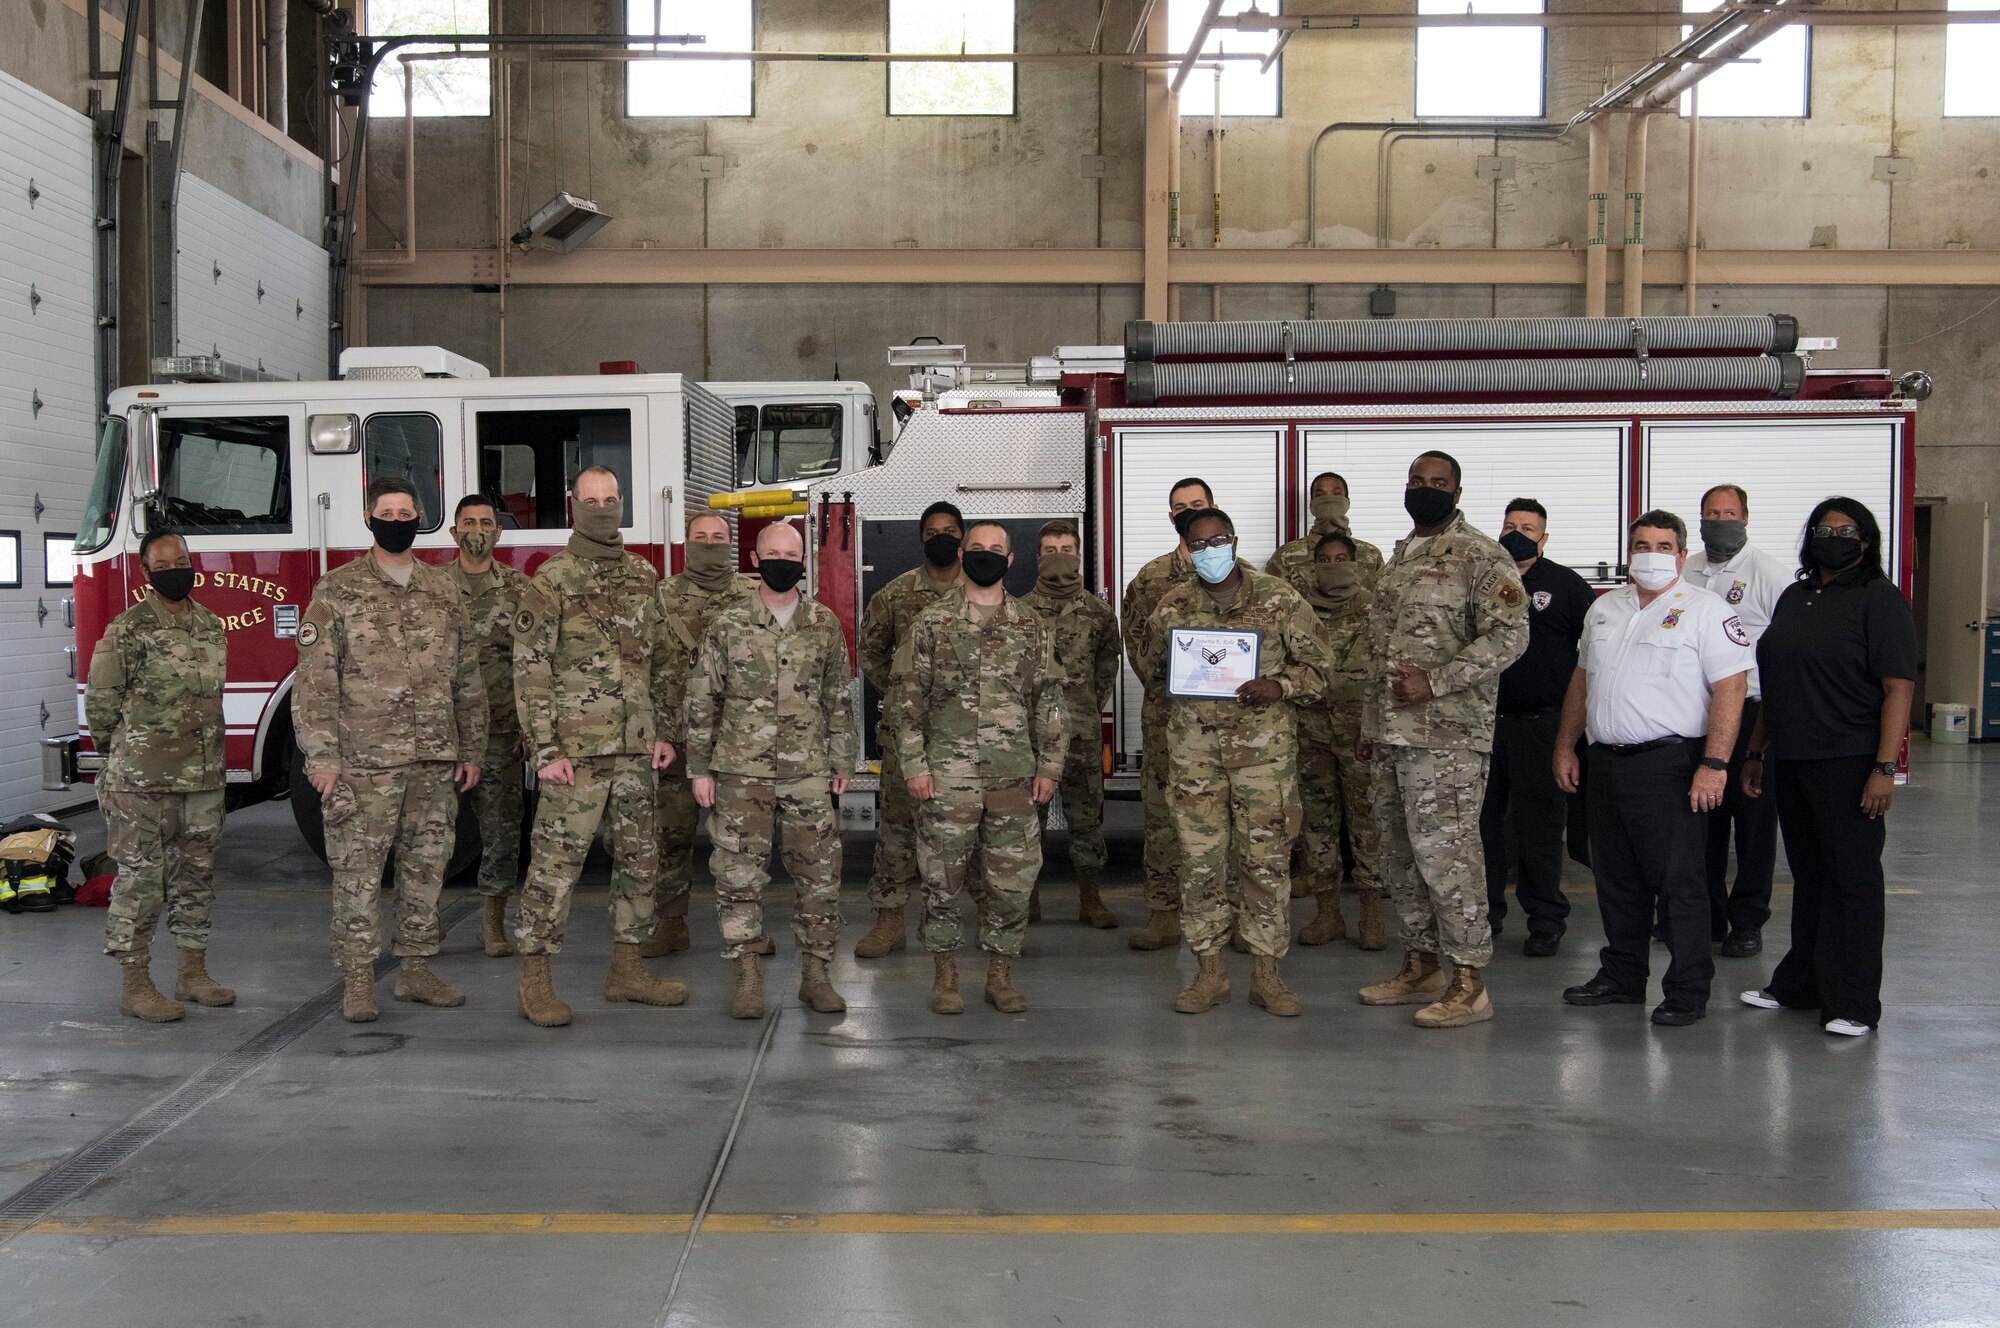 Col. Lee Gentile, 47th Flying Training Wing commander, and Chief Master Sgt. Robert L. Zackery III, 47th Command Chief, present Airman 1st Class Joquetta K. Rolle, a 47th Civil Engineer Squadron firefighter, with her Senior Airman Below-the-Zone certificate on May 8, 2020, at Laughlin Air Force Base, Texas. Team members from the 47th Mission Support Group posed for photo with Rolle and congratulated her for the accomplishment. (U.S. Air Force photo by Senior Airman Marco A. Gomez)